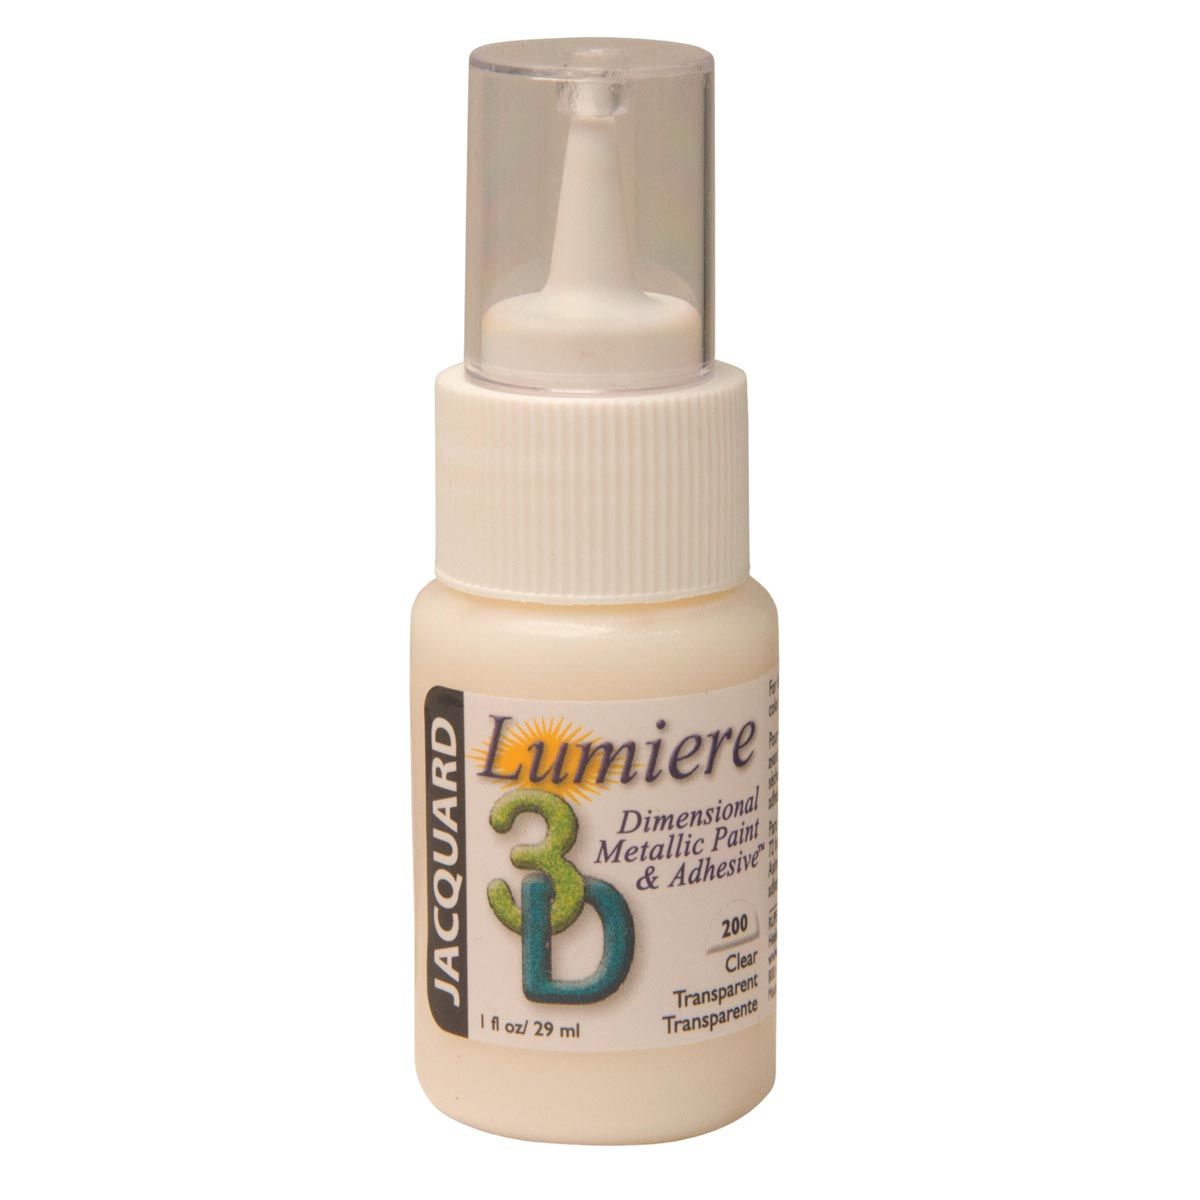 Lumiere 3D Metallic Paint & Adhesive, Clear 1oz